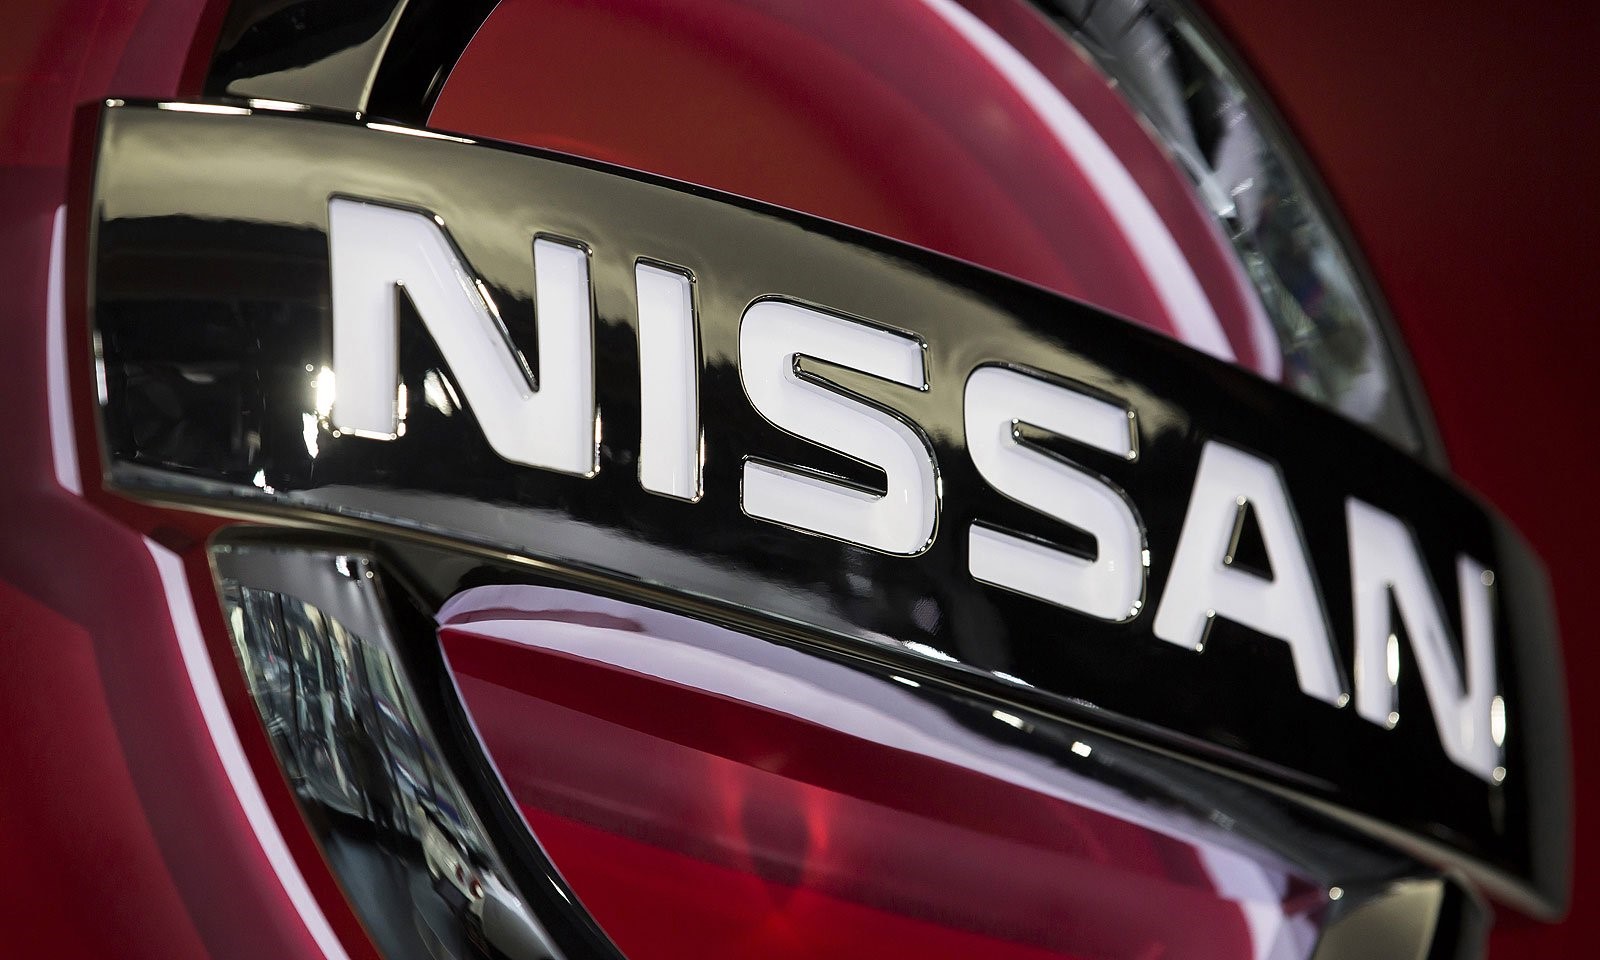 Nissan to Launch 7 Models in Africa in Two Years